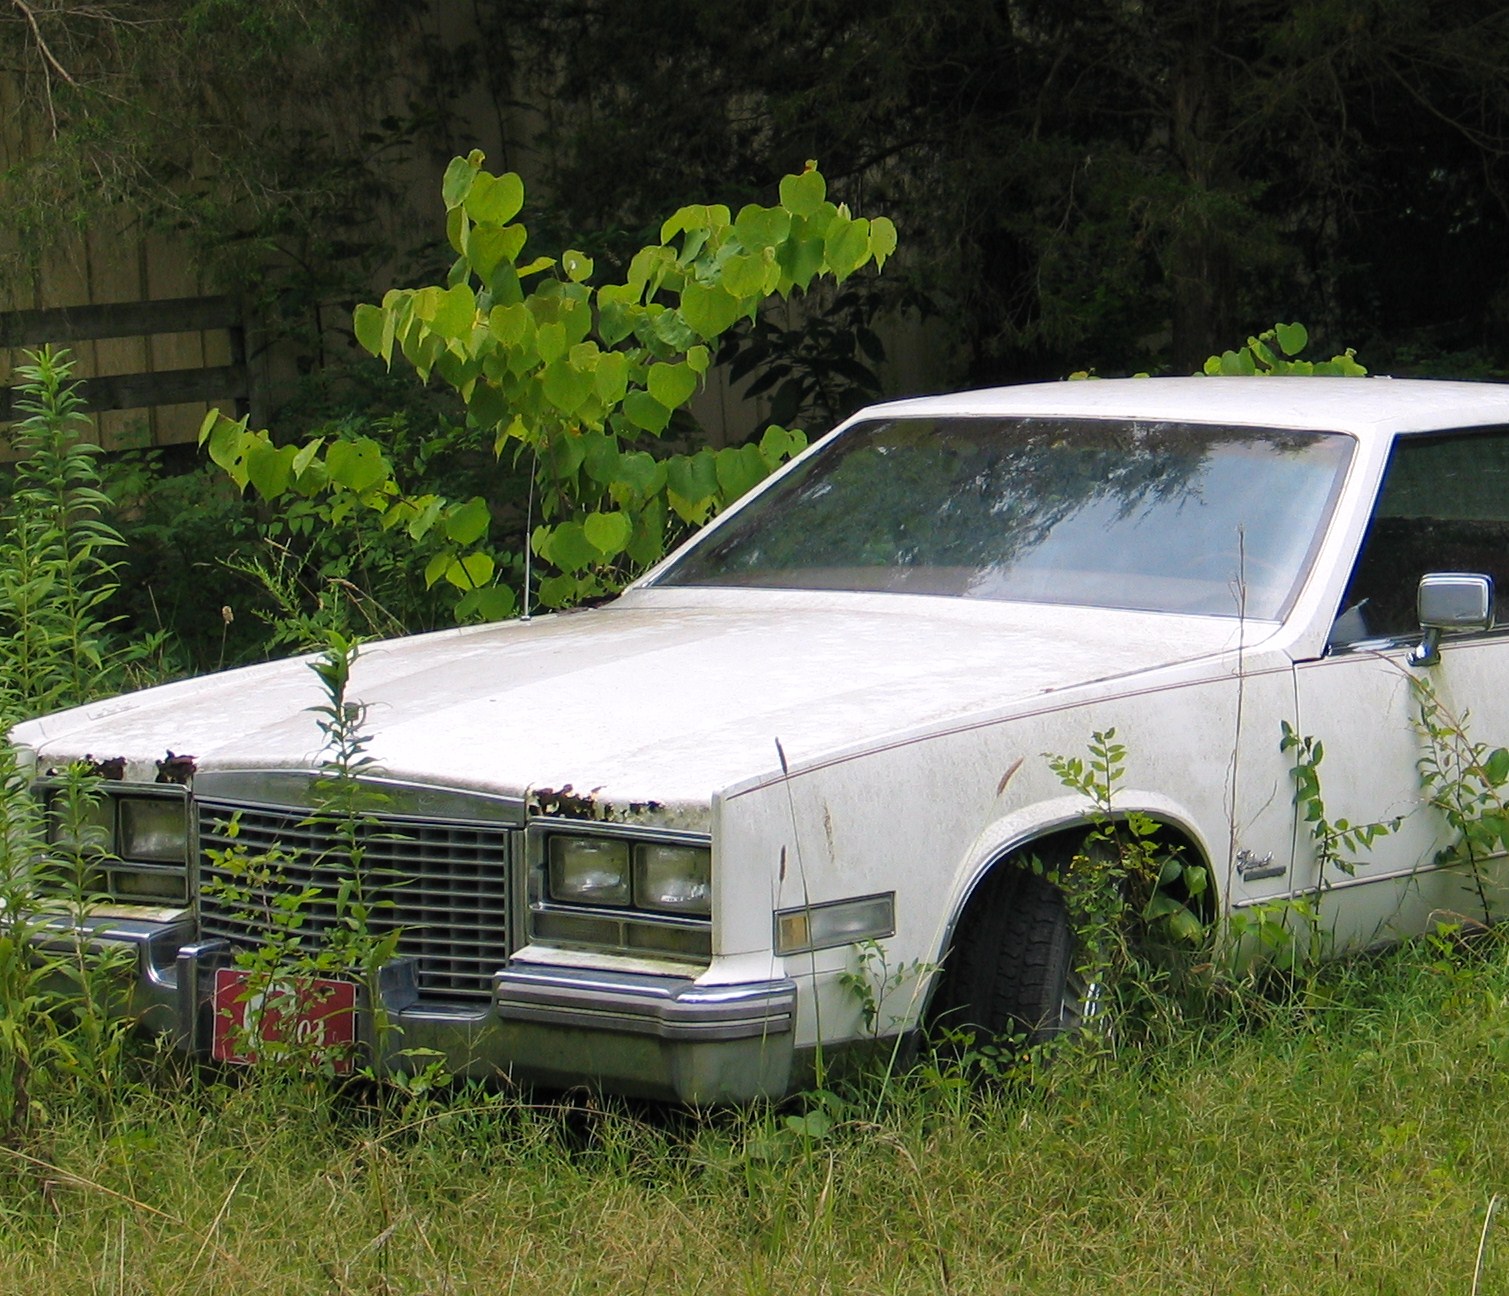 How Removing Junk Car’s Improves the Neighborhood.